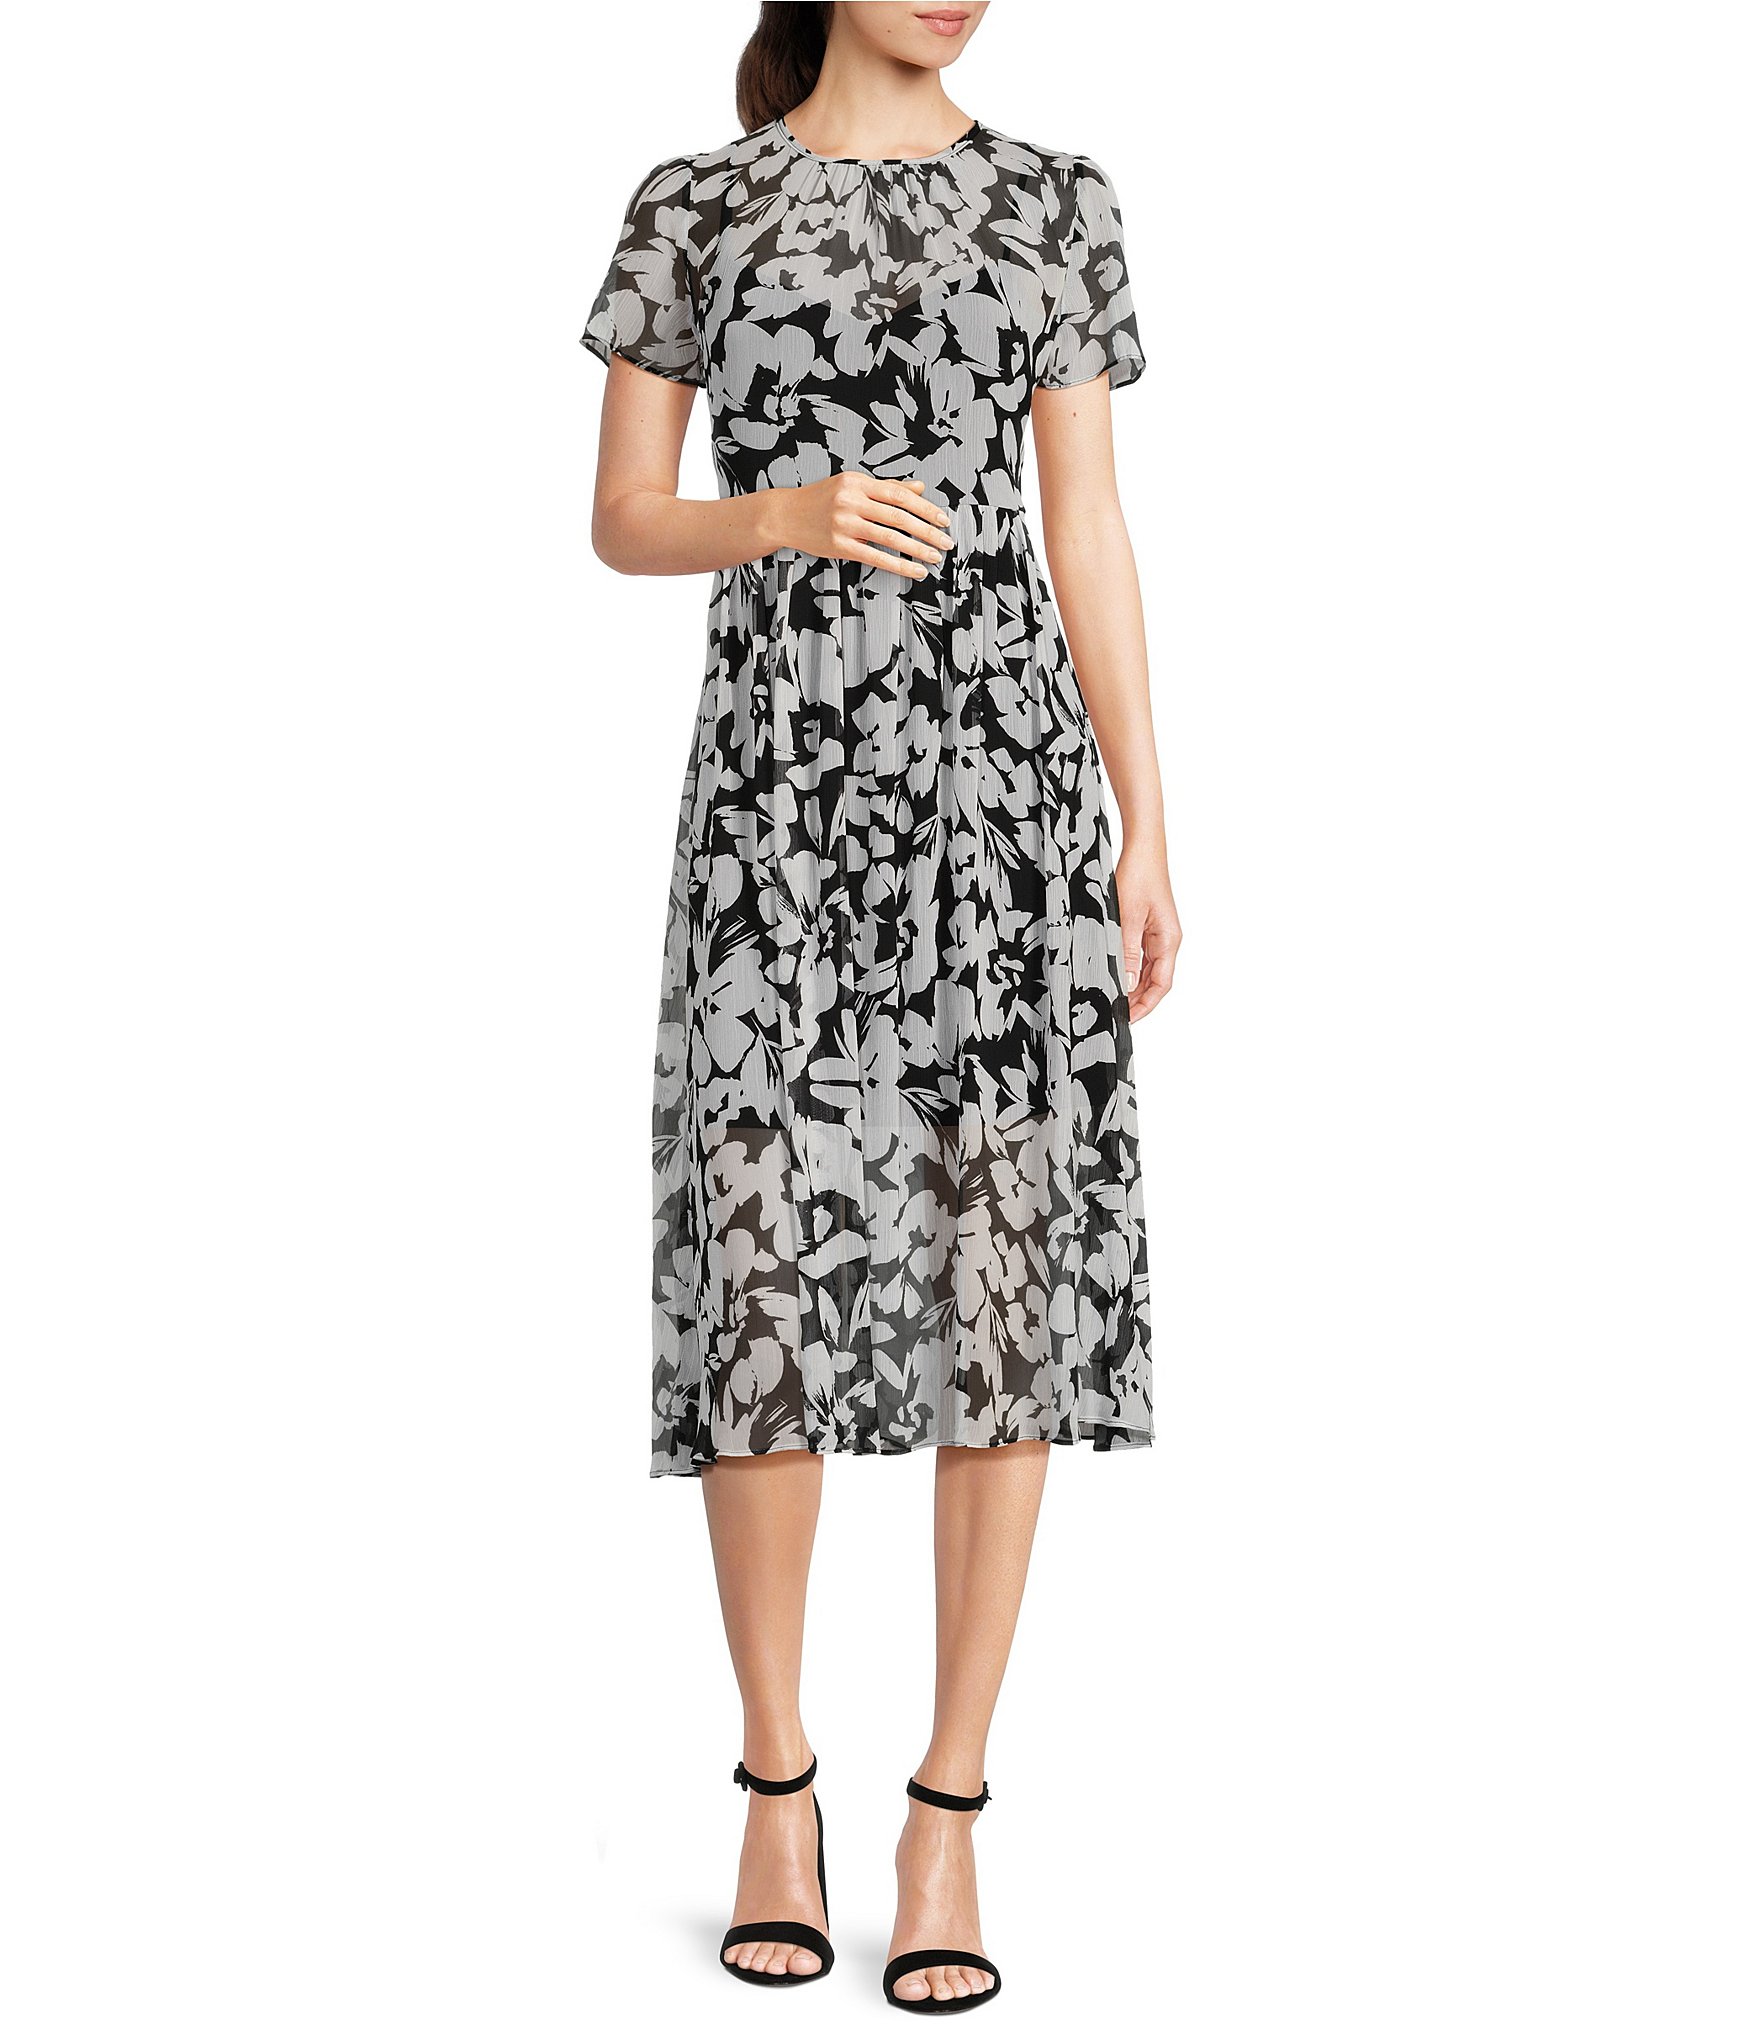 CALVIN KLEIN Dress sz 6 Floral Print Brand New with Tag FREE